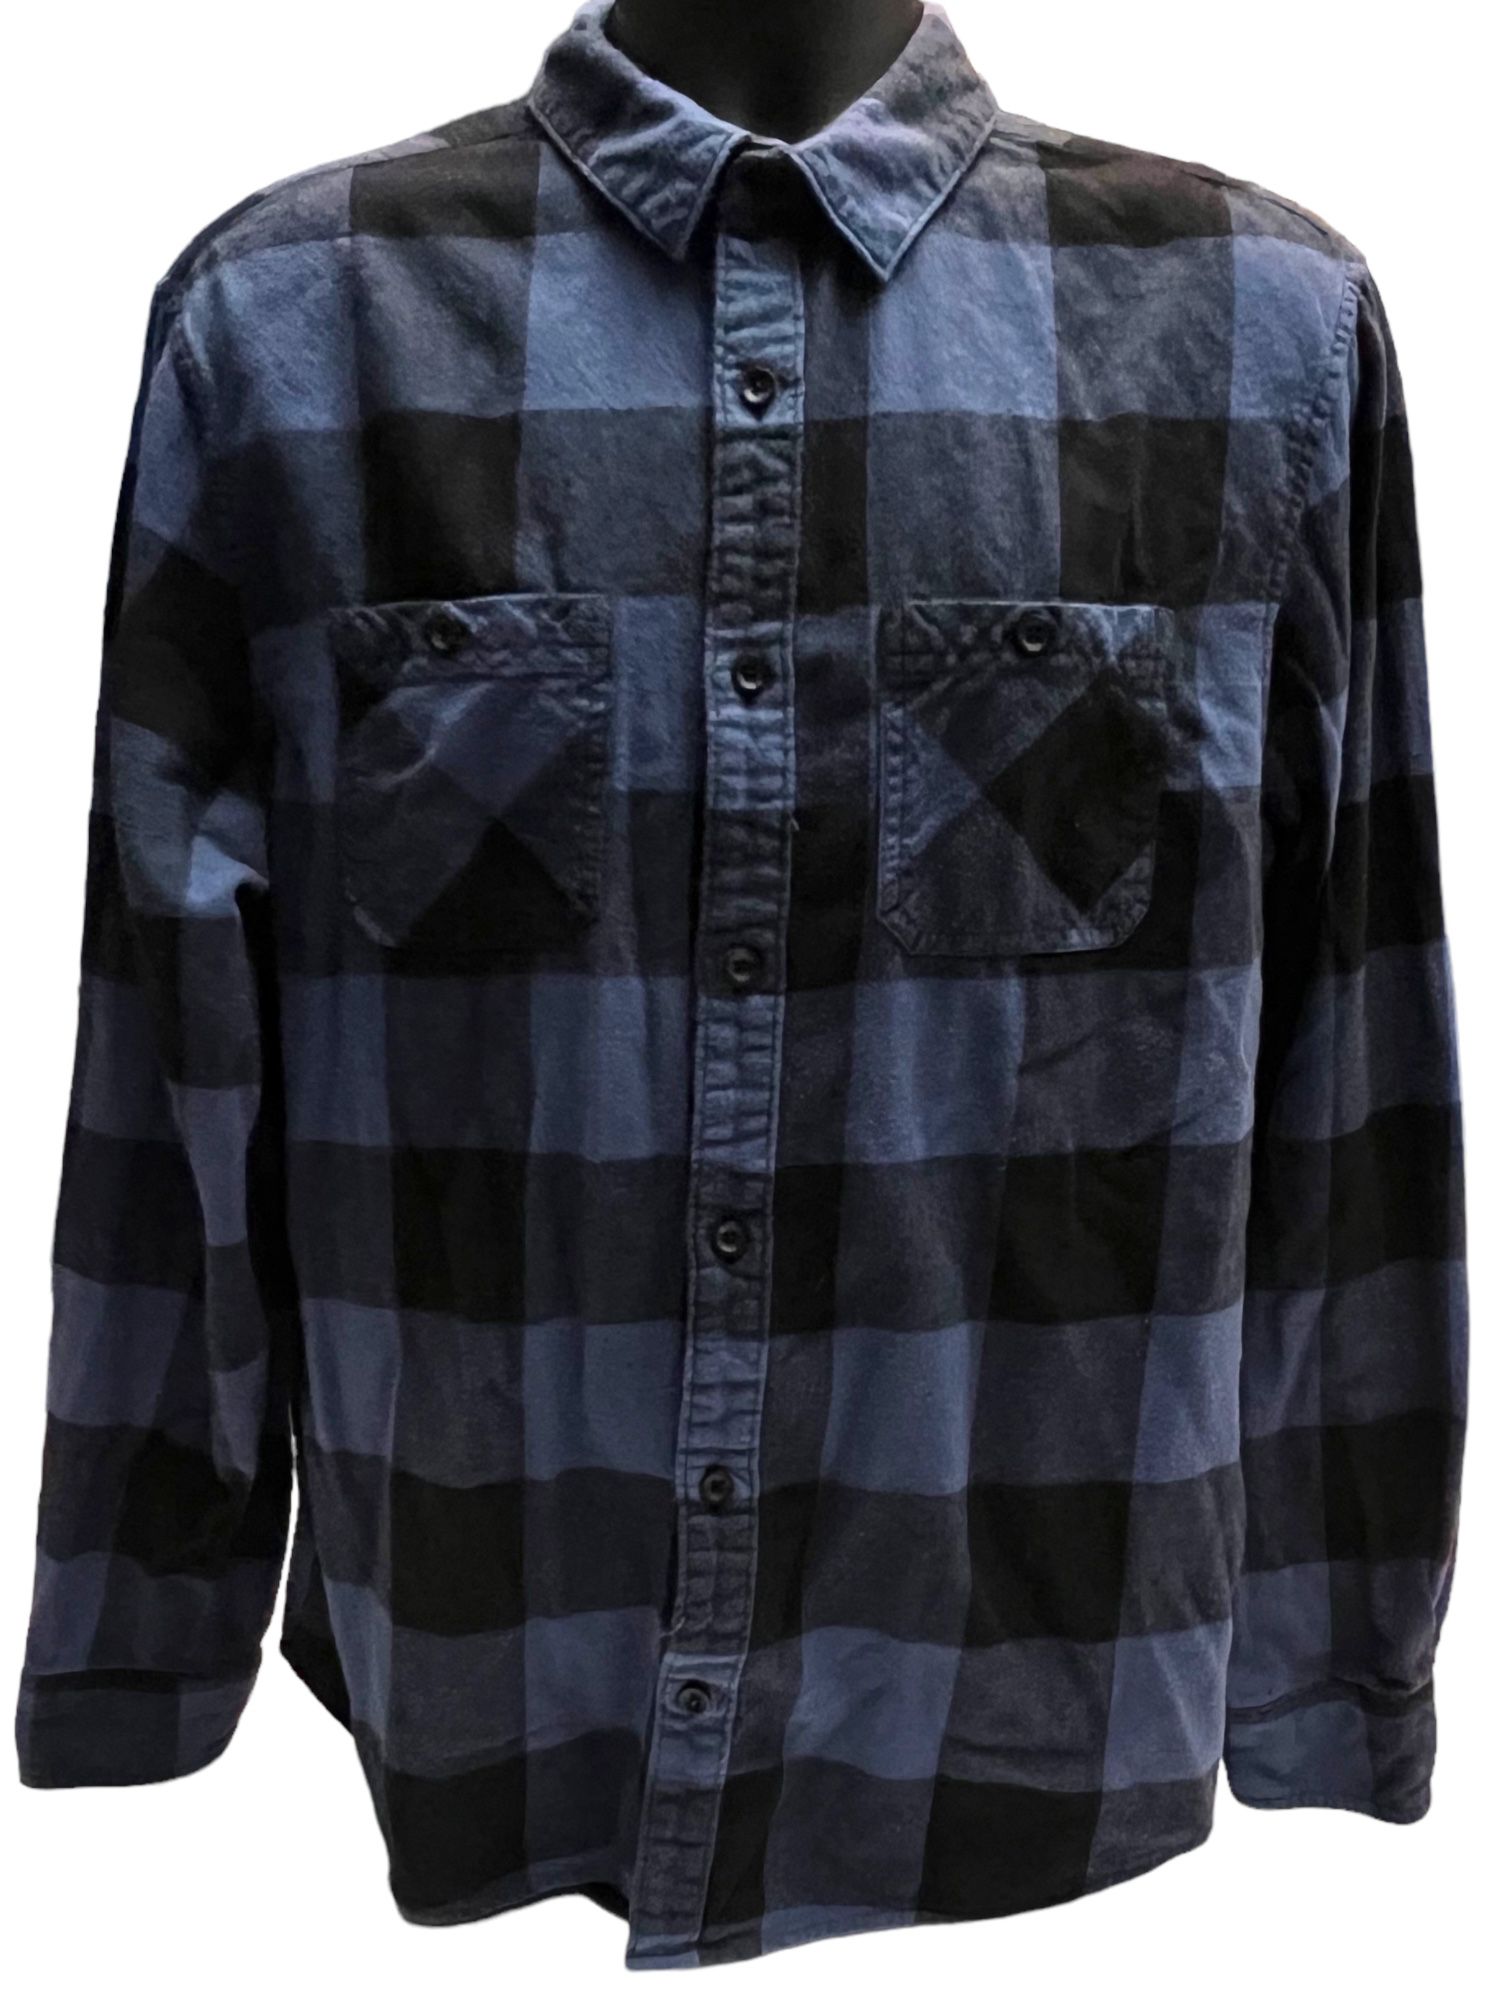 Urban Pipeline Flannel Blue and Black Plaid Button-Up Shirt Size Large